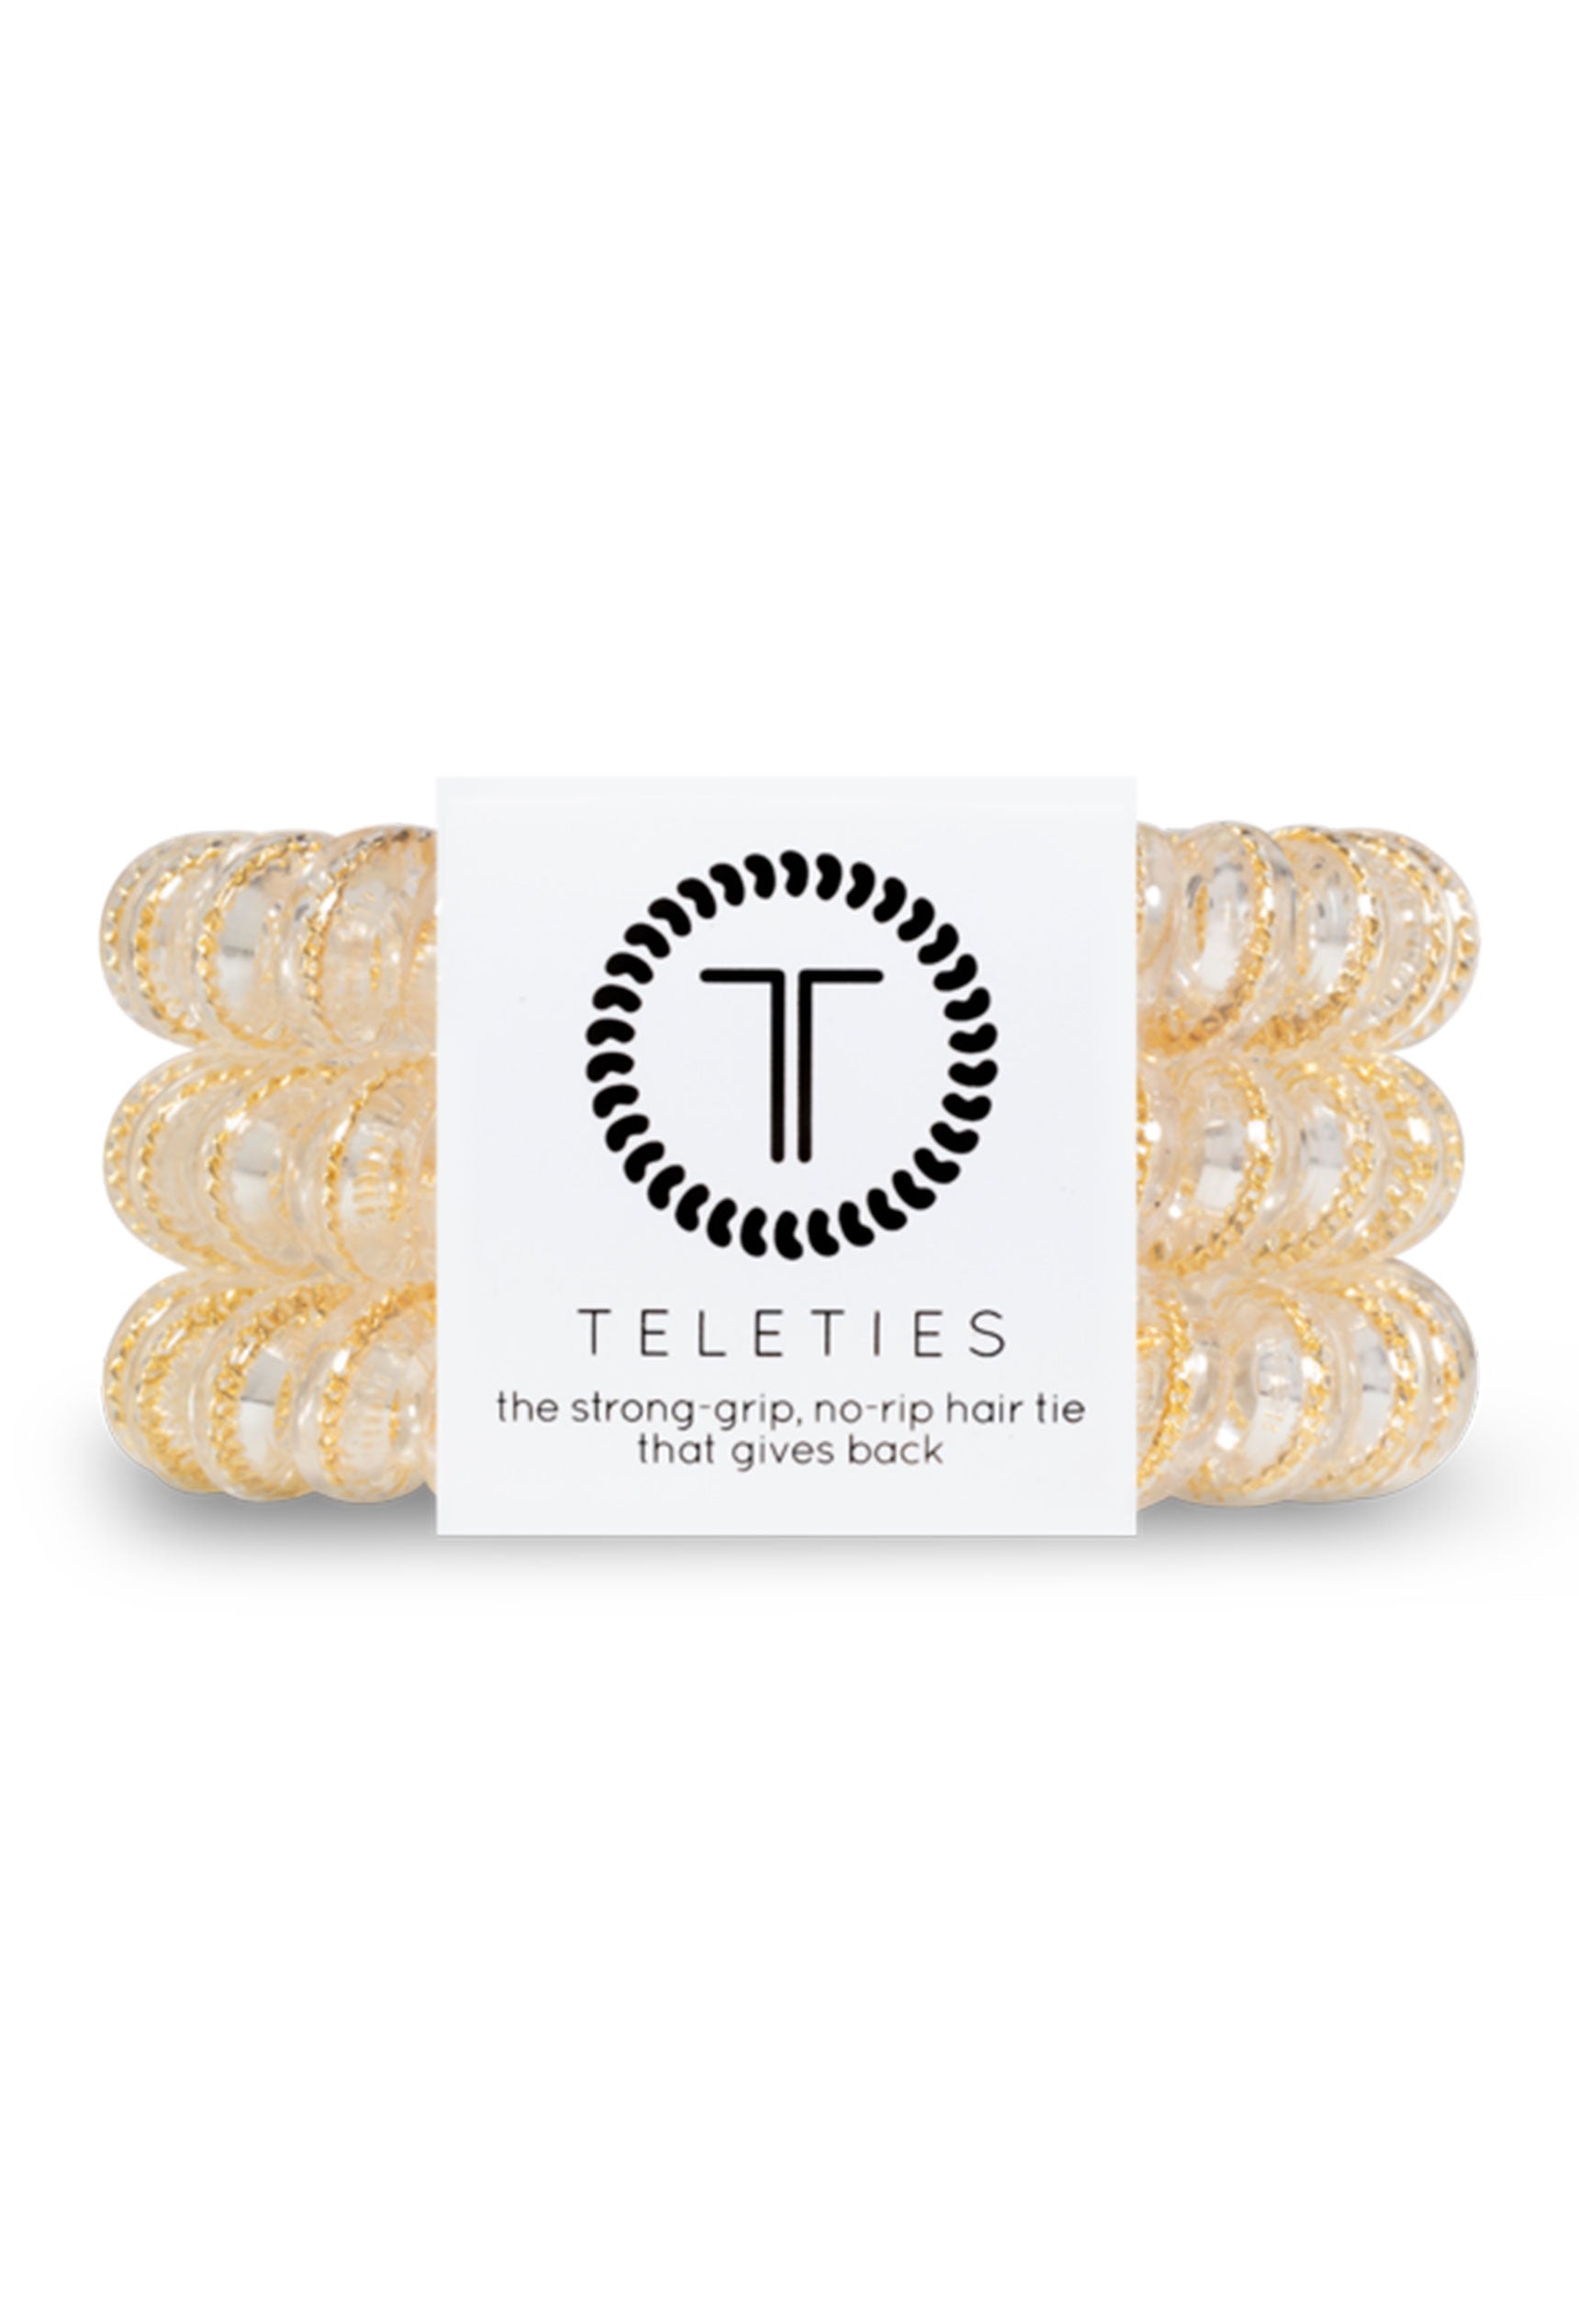 TELETIES Large Hair Ties - Counting Karats, clear hair coils hair ties with small gold chain inside set of 3